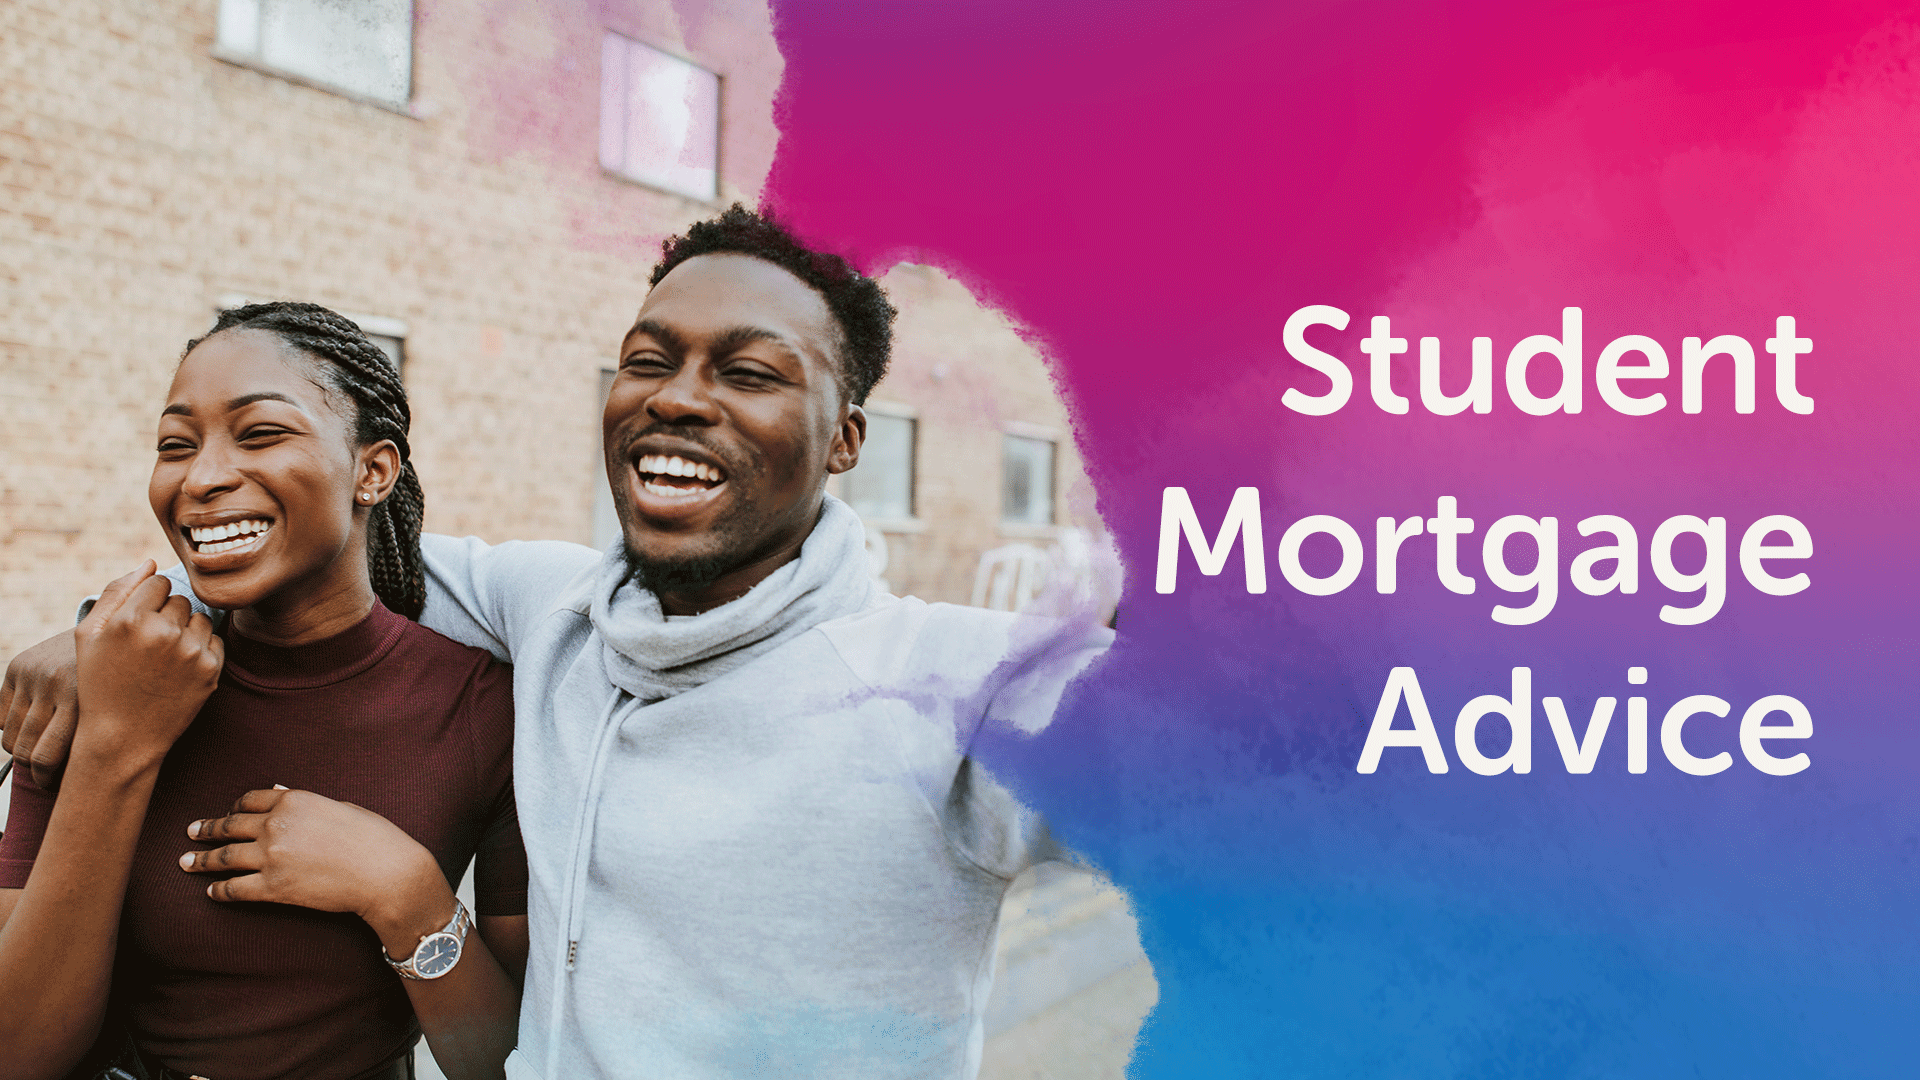 Can a Student Get a Mortgage in Leeds?